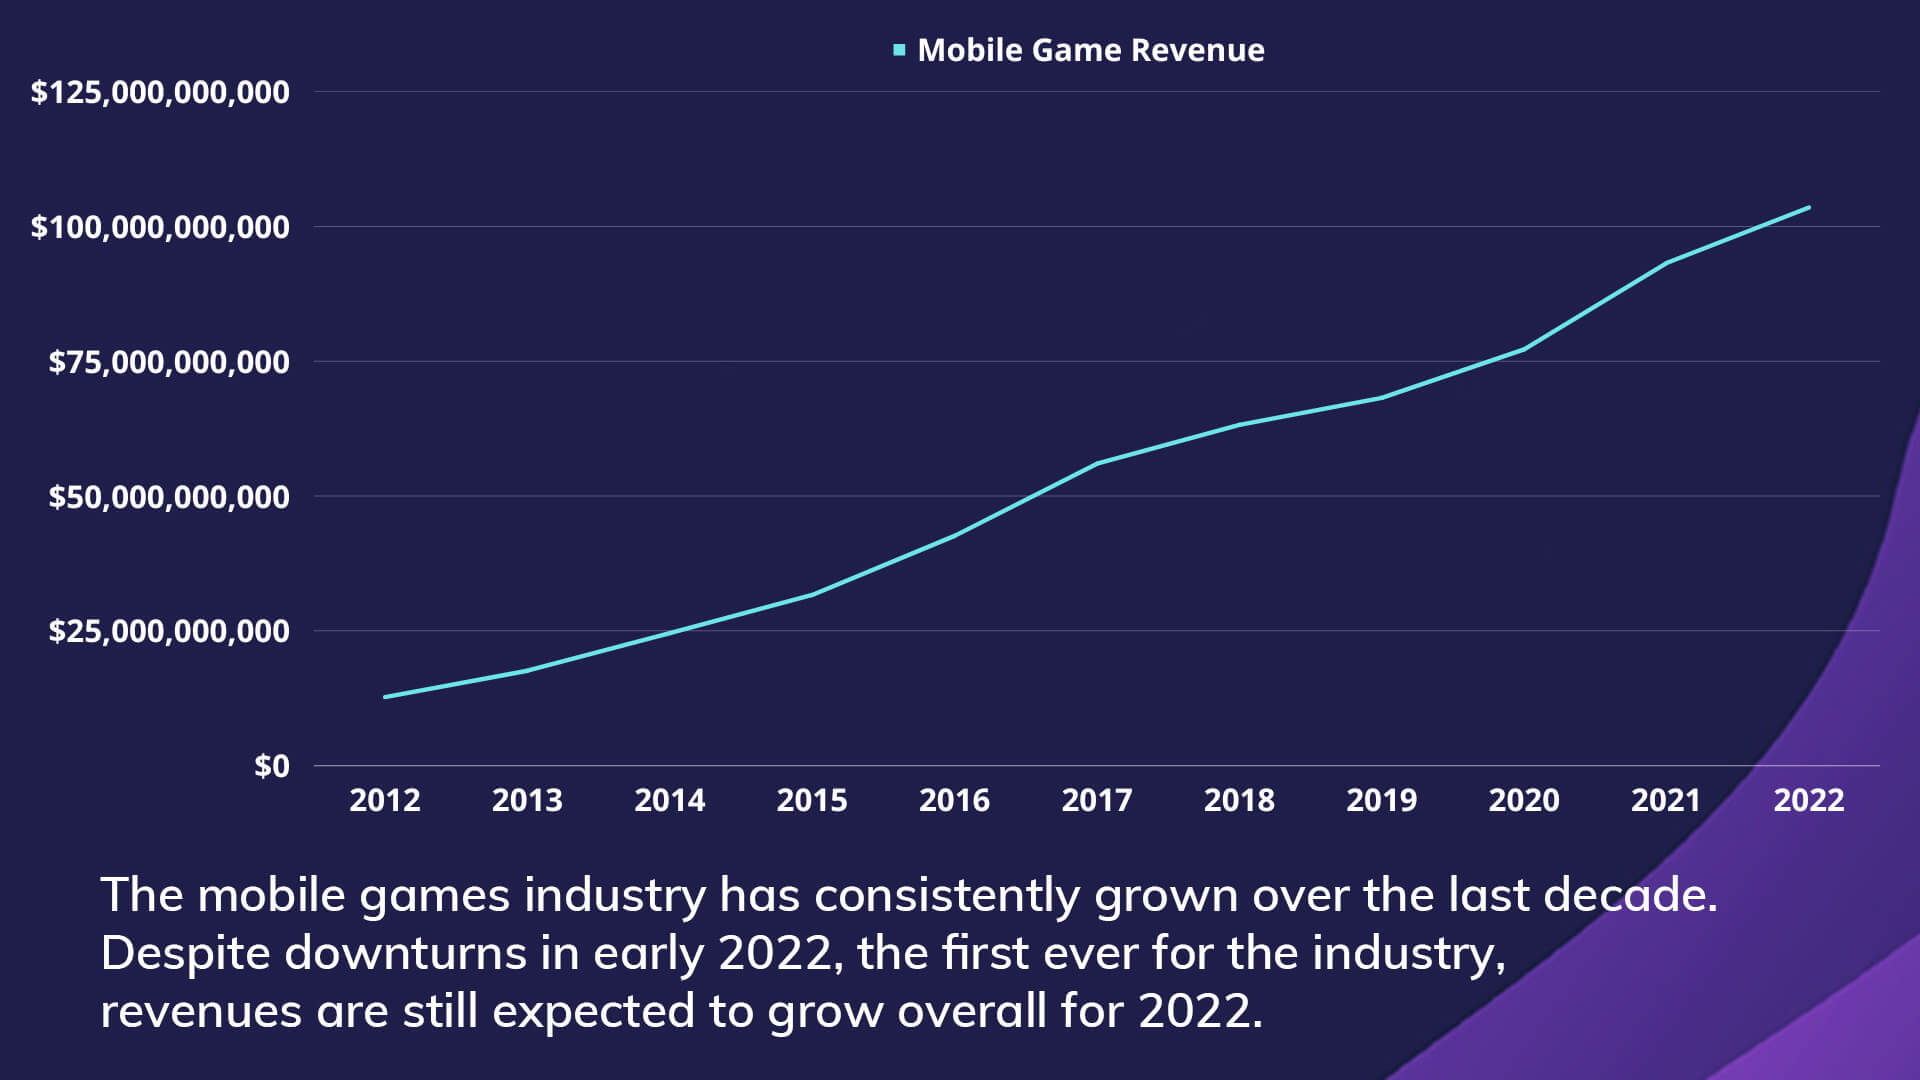 2012-2022 Mobile Games Revenue Growth: The mobile games industry has consistently grown over the last decade. Despite downturns in early 2022, the first ever for the industry, revenues are still expected to grow overall for 2022.